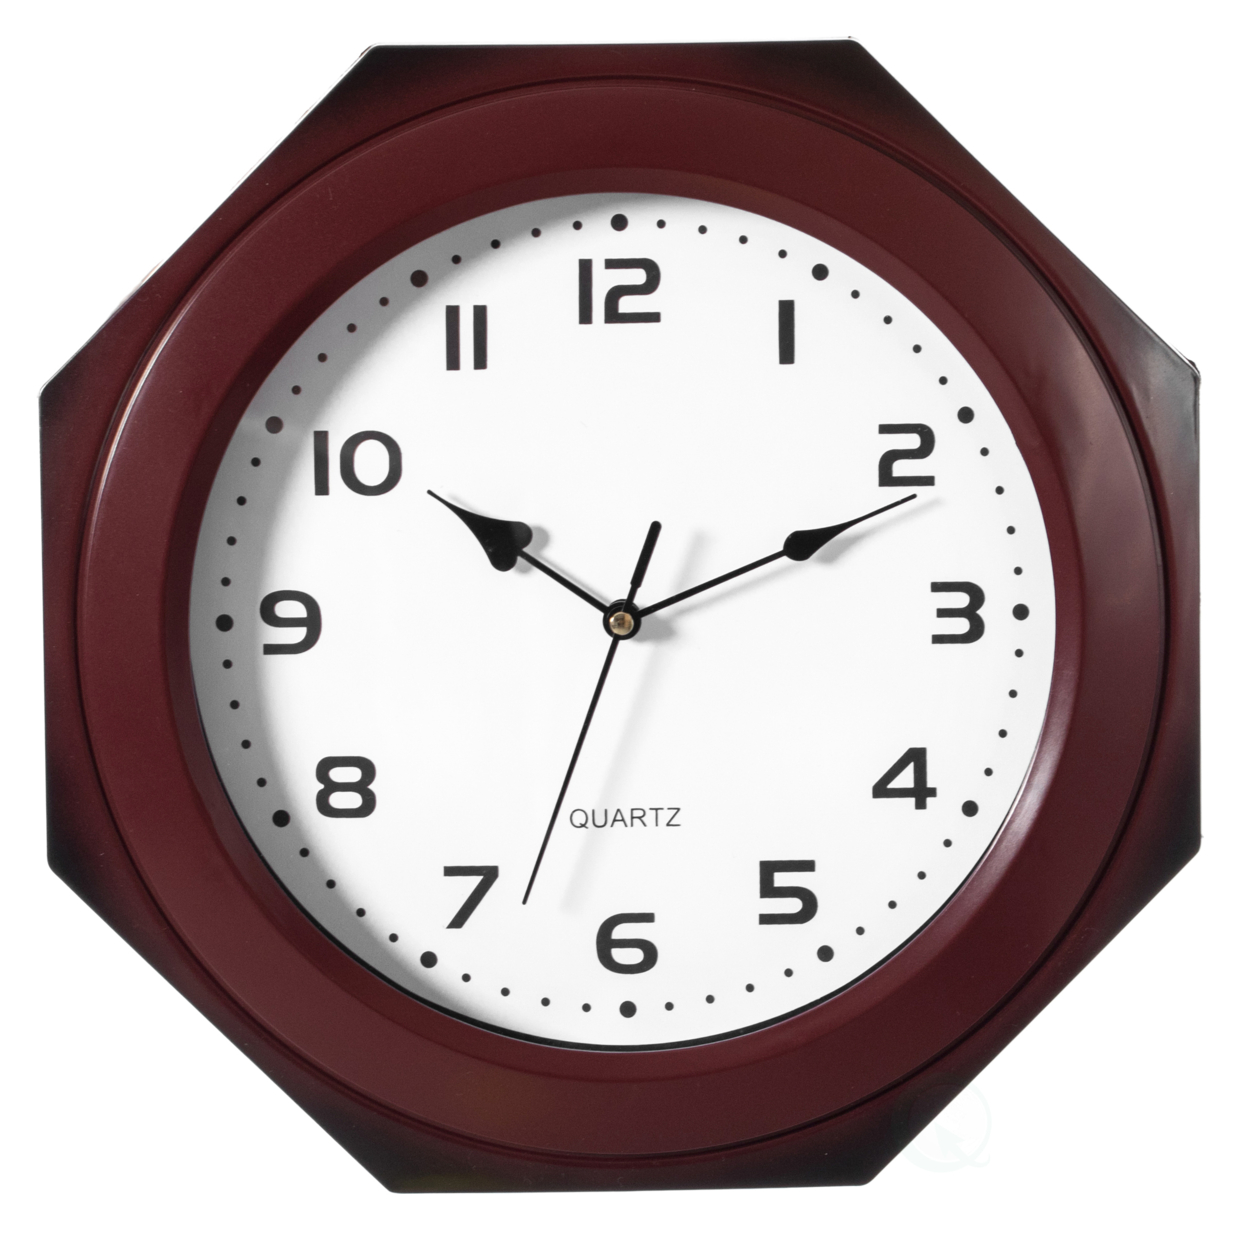 Brown Modern Decorative Octagon Shaped Wood- Looking Plastic Wall Clock For Living Room, Kitchen, Or Dining Room